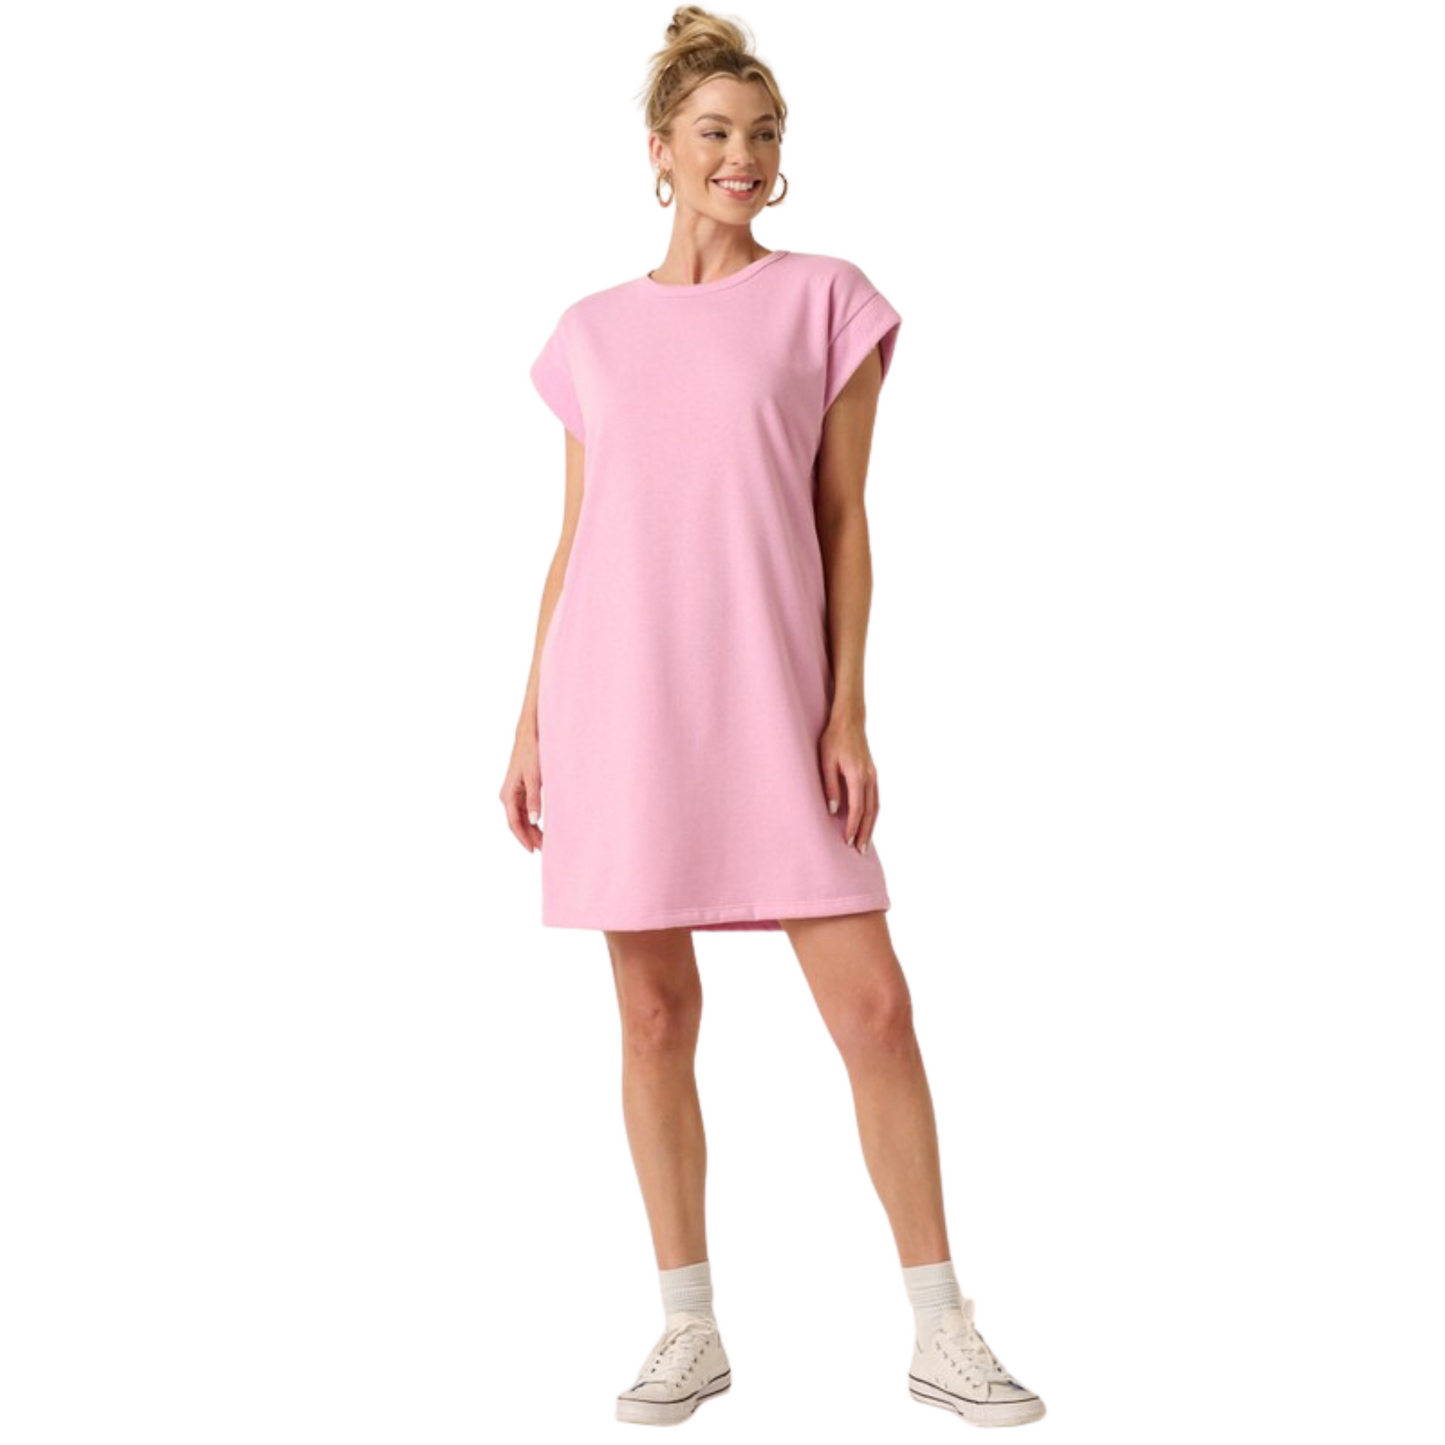 Crafted in a luxe French Terry, this mini dress comes in perfect Pink, Blue, and Black hues. It's designed with a classic sweatshirt dress silhouette and short sleeves, perfect for casual weekend days and laid-back office looks.